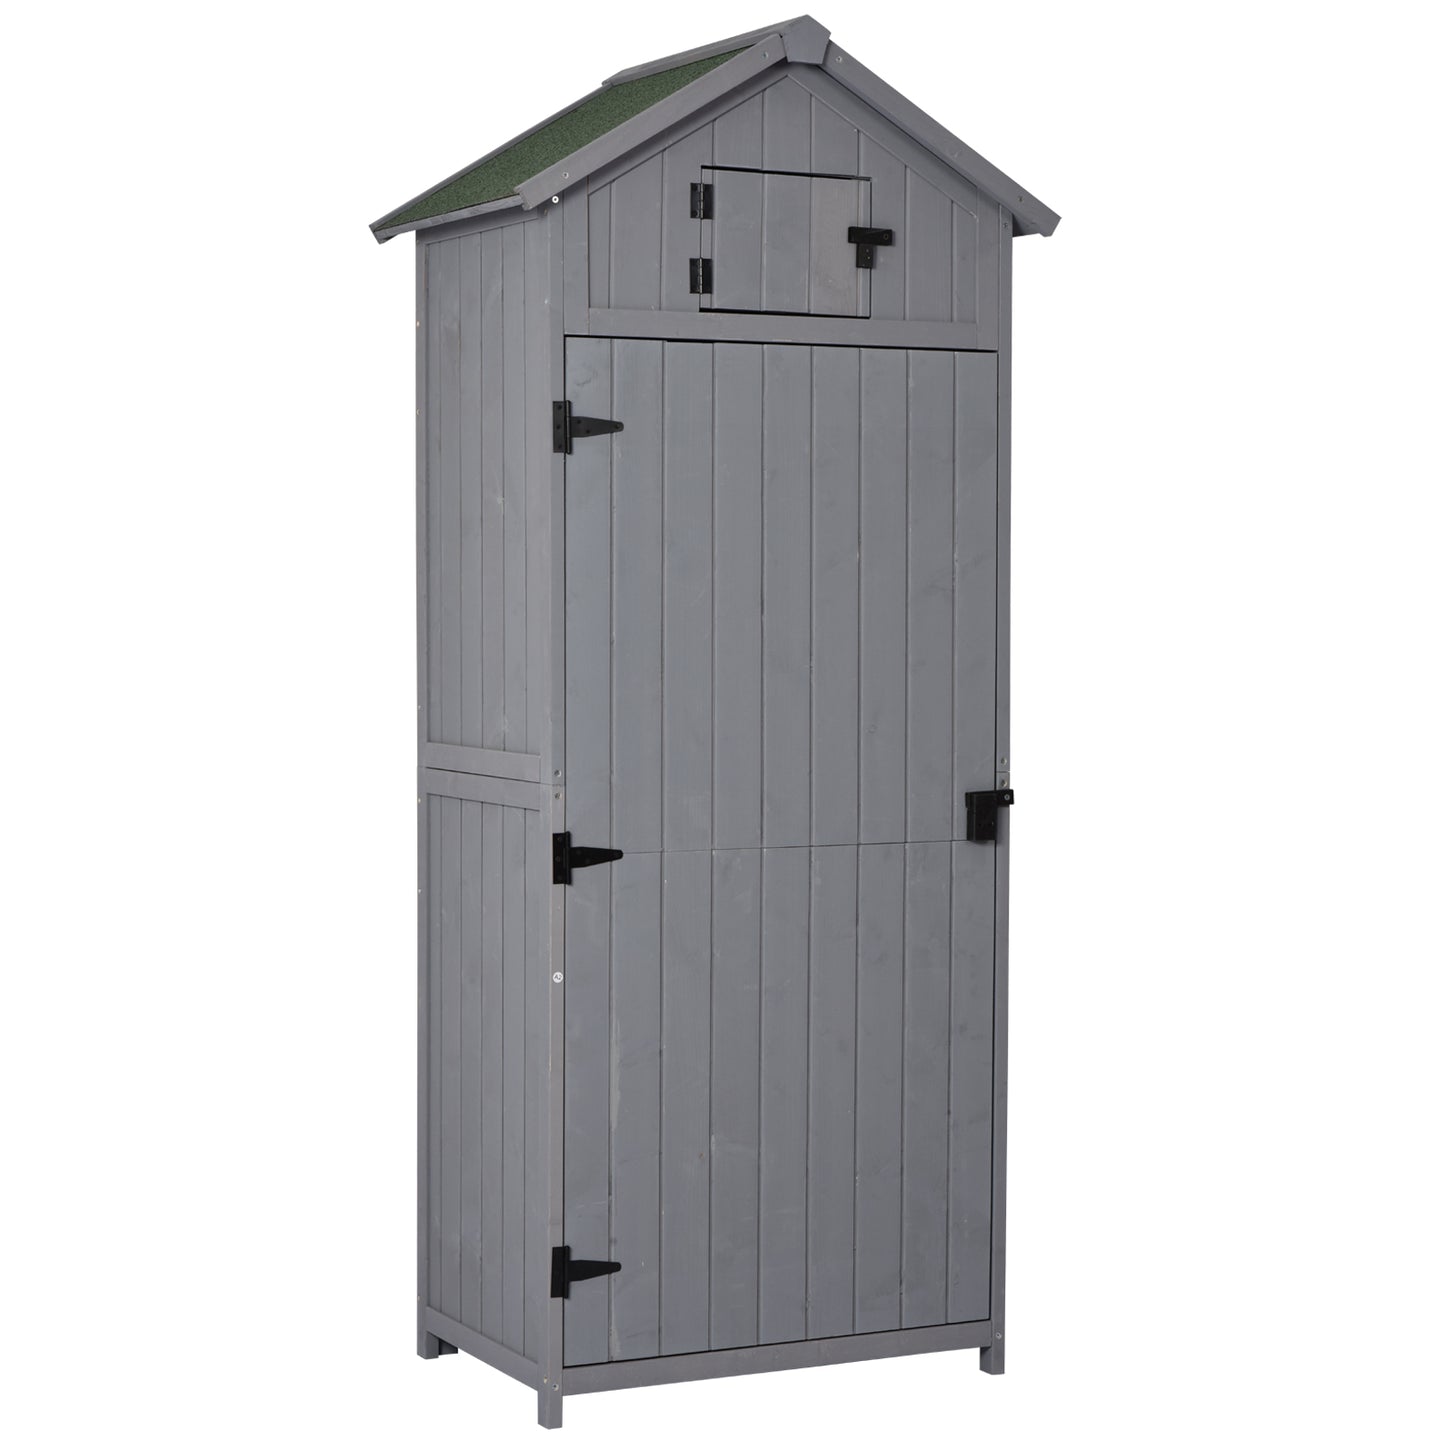 Outsunny 1.7 x 2.5ft Narrow Wooden Garden Shed with Asphalt Roof - Grey